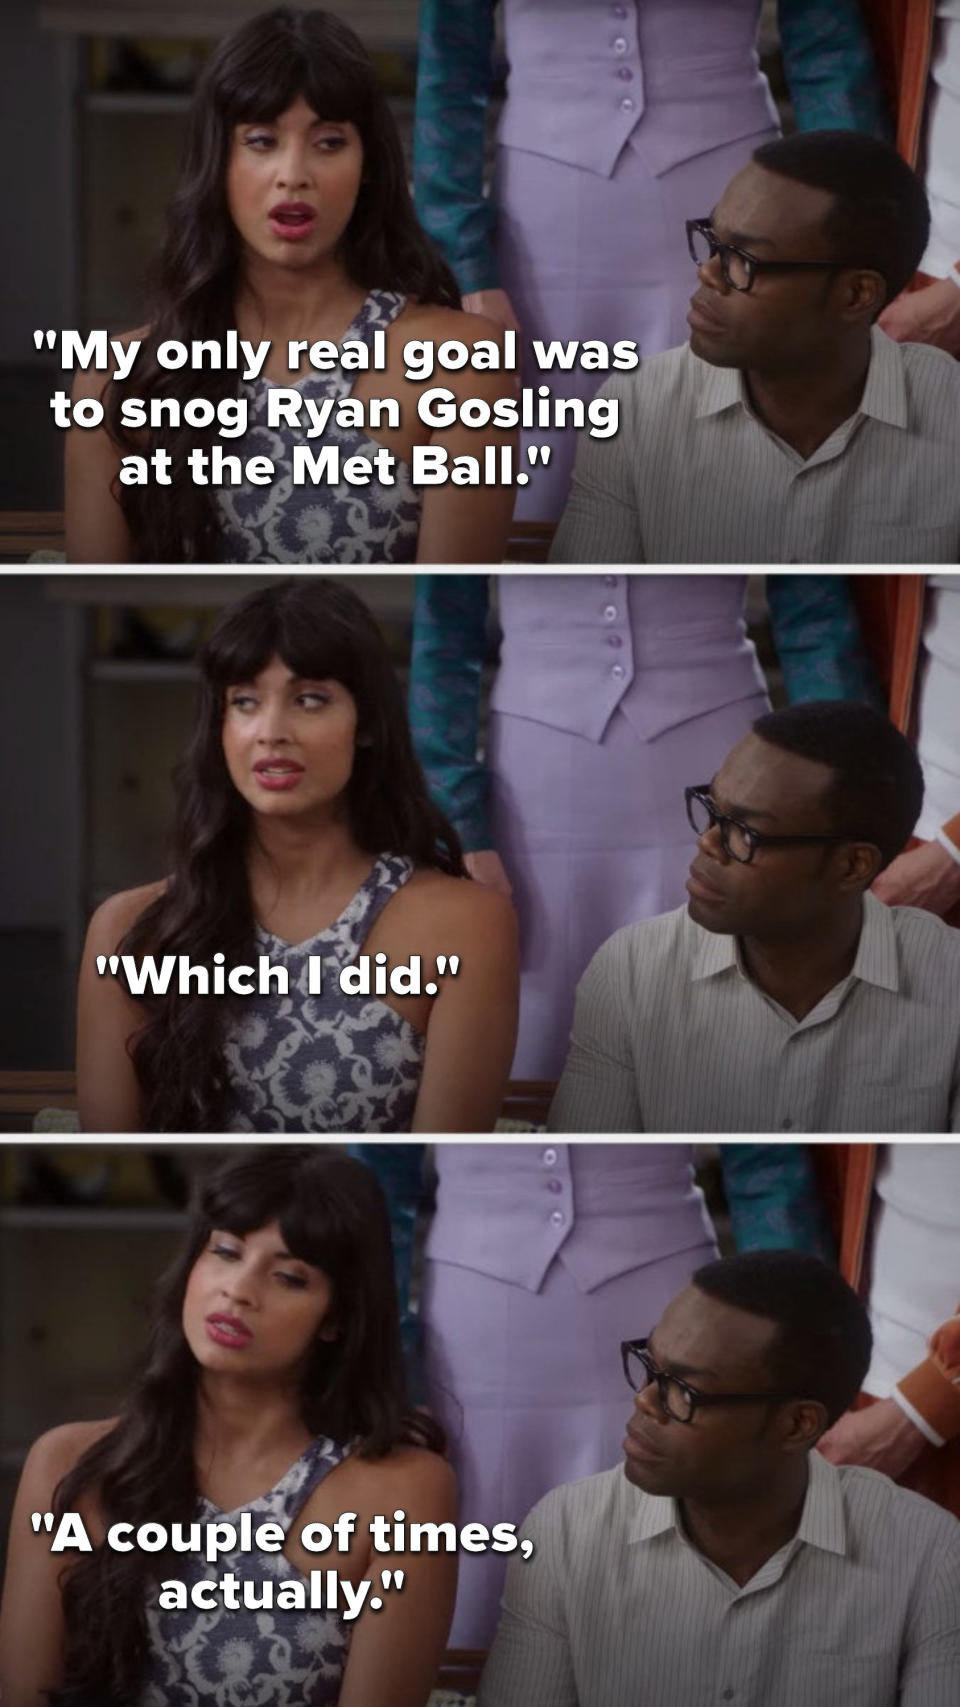 Tahani says, My only real goal was to snog Ryan Gosling at the Met Ball, which I did, a couple of times, actually